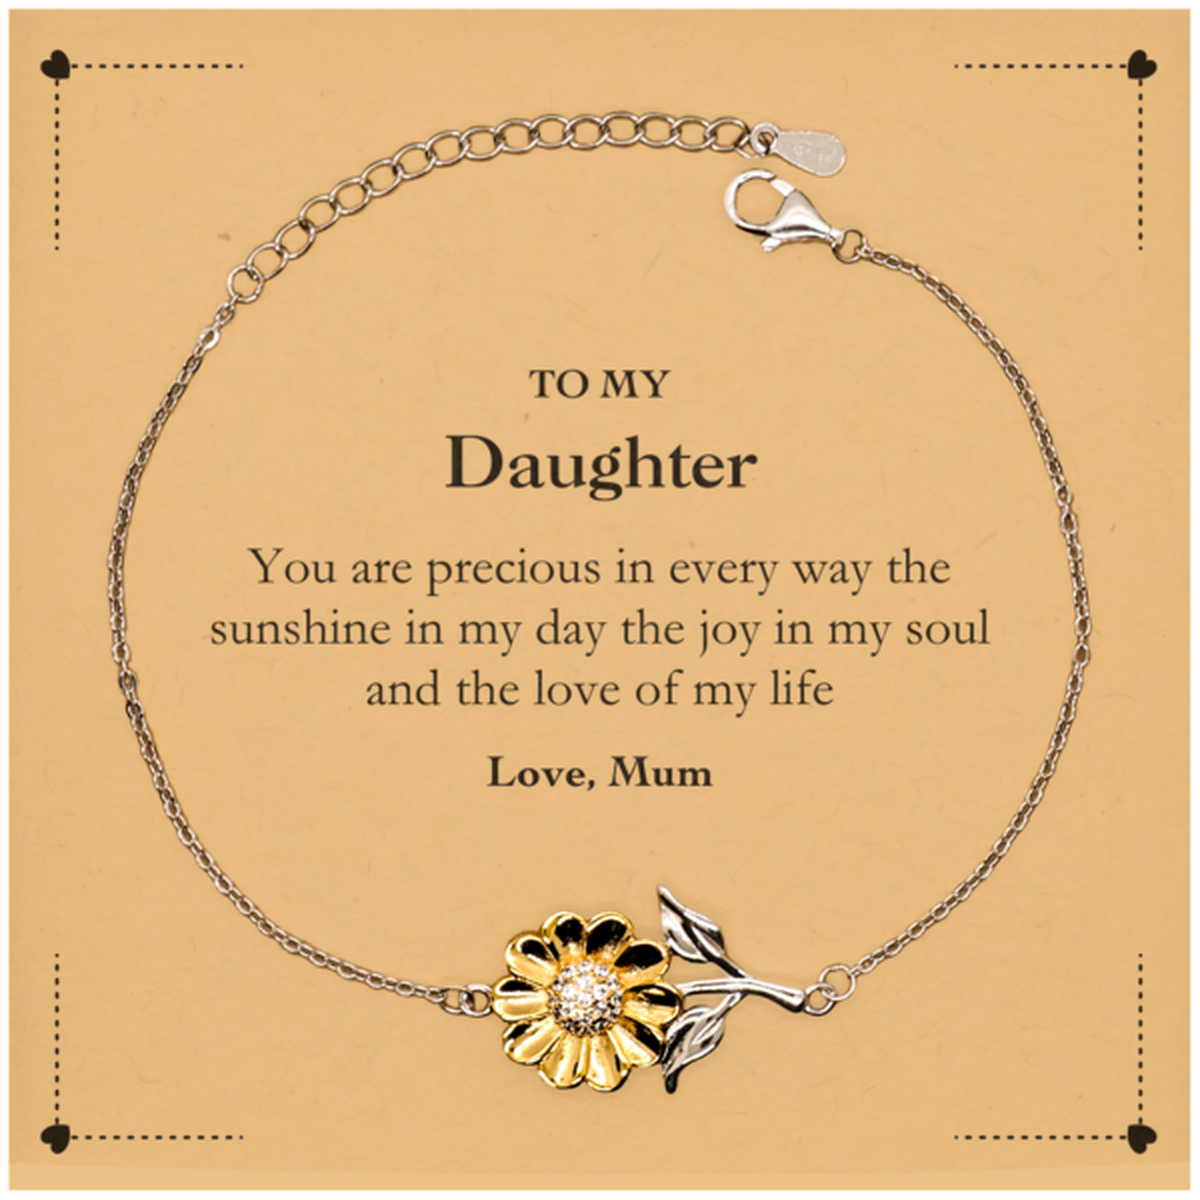 Graduation Gifts for Daughter Sunflower Bracelet Present from Mum, Christmas Daughter Birthday Gifts Daughter You are precious in every way the sunshine in my day. Love, Mum